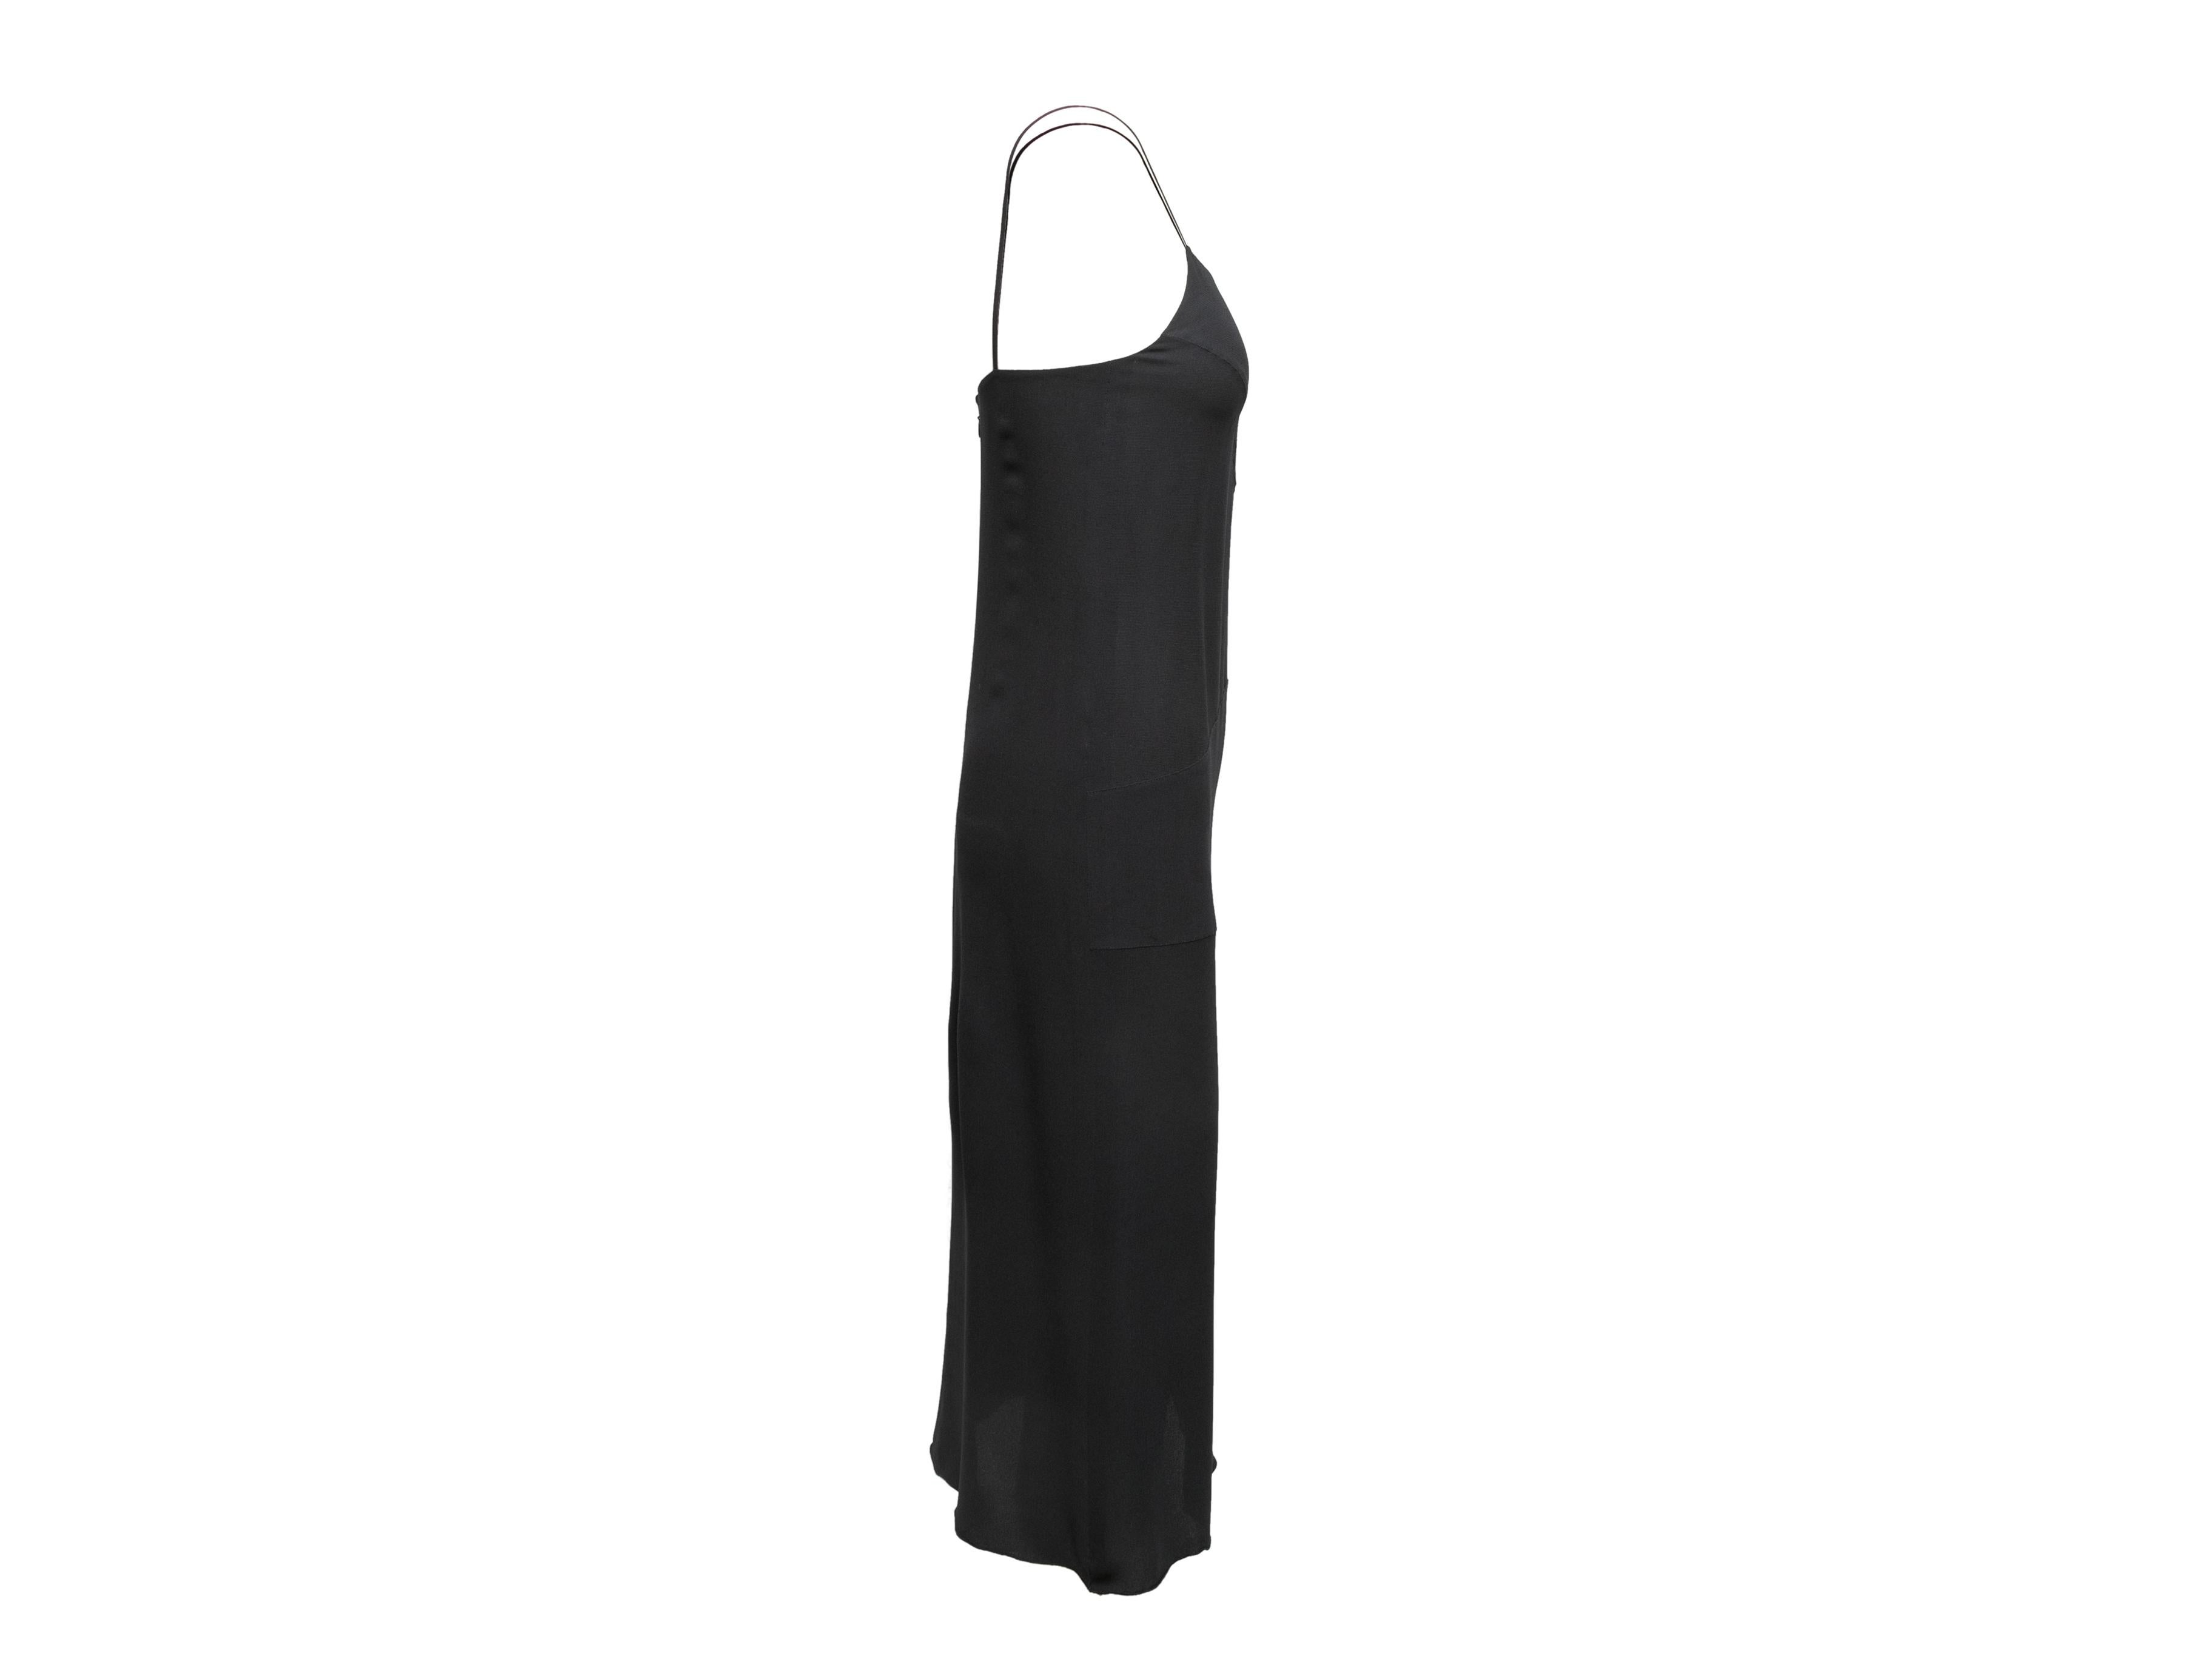 Vintage black silk sleeveless maxi dress by Chanel Boutique. From the Fall 1997 Collection. Scoop neckline. Narrow straps. Zip closure at center back. Designer size 38. 30